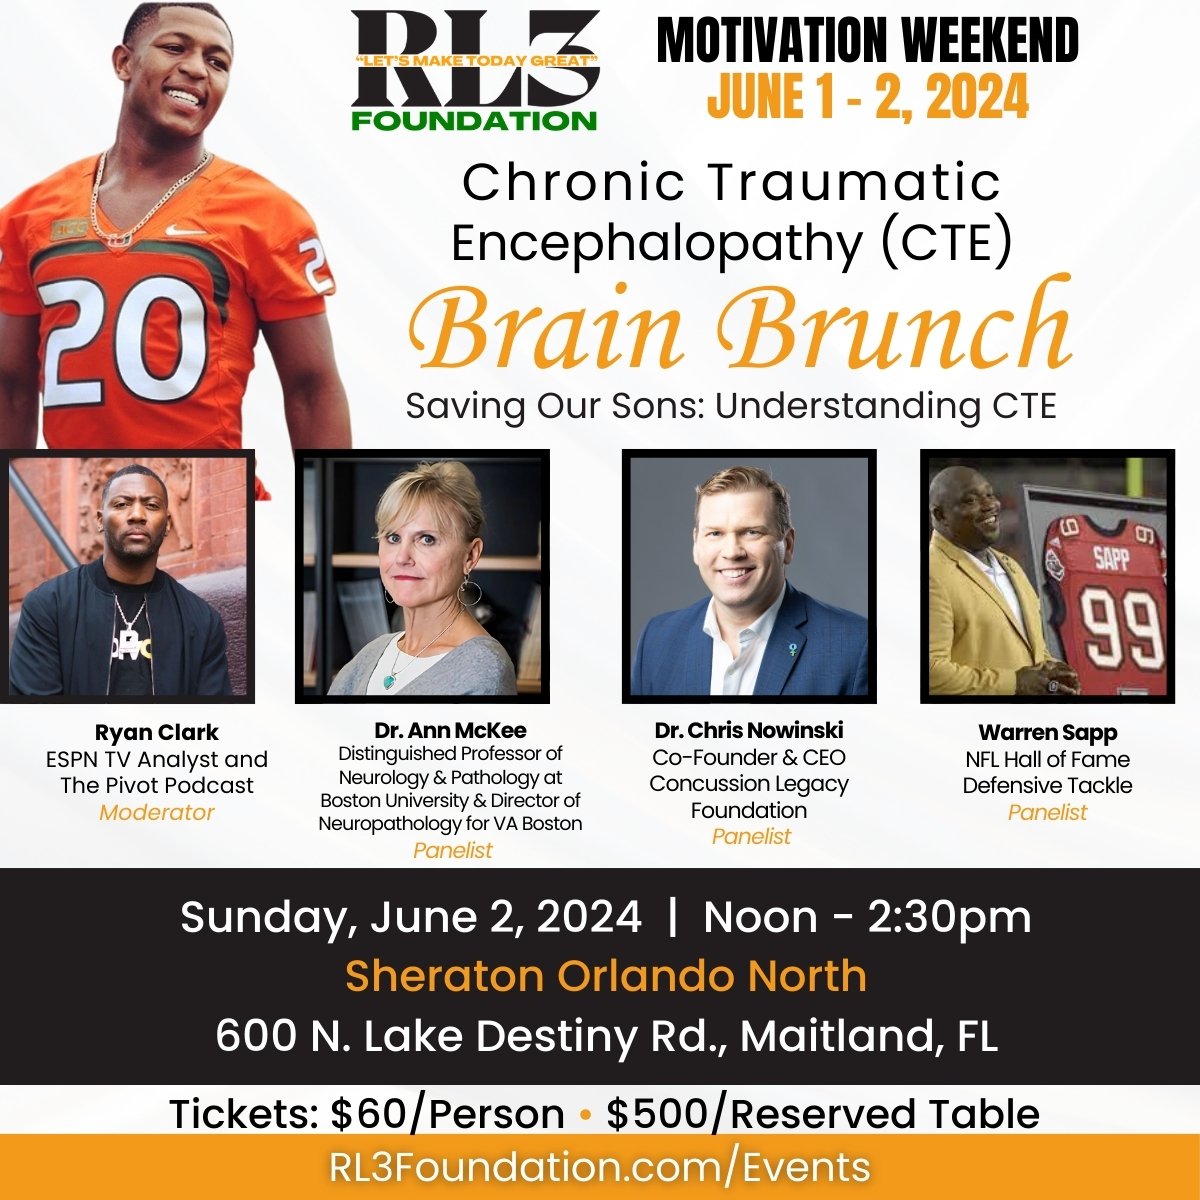 RL3 Foundation will host 'Saving Our Sons: Understanding CTE' brunch June 2 in Orlando, supporting CTE research and safer football. Panel includes Ray Lewis, Warren Sapp, CLF CEO Dr. Chris Nowinski, Dr. Ann McKee & moderator Ryan Clark. Info & tickets: eventbrite.com/e/rl3-foundati…